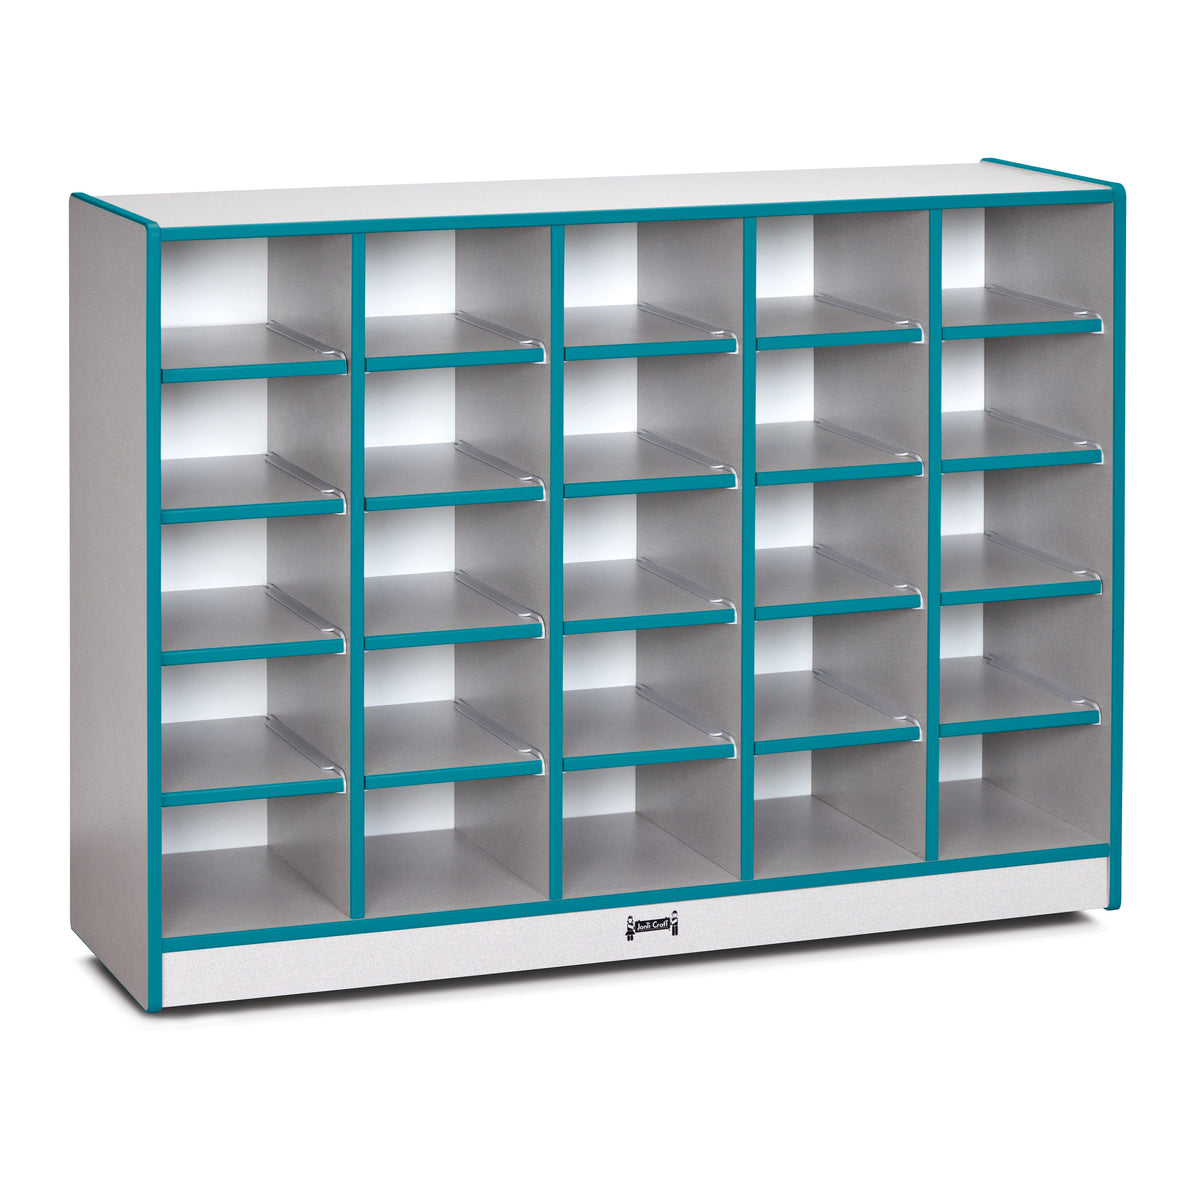 0425JCWW005, Rainbow Accents 25 Cubbie-Tray Mobile Storage - without Trays - Teal